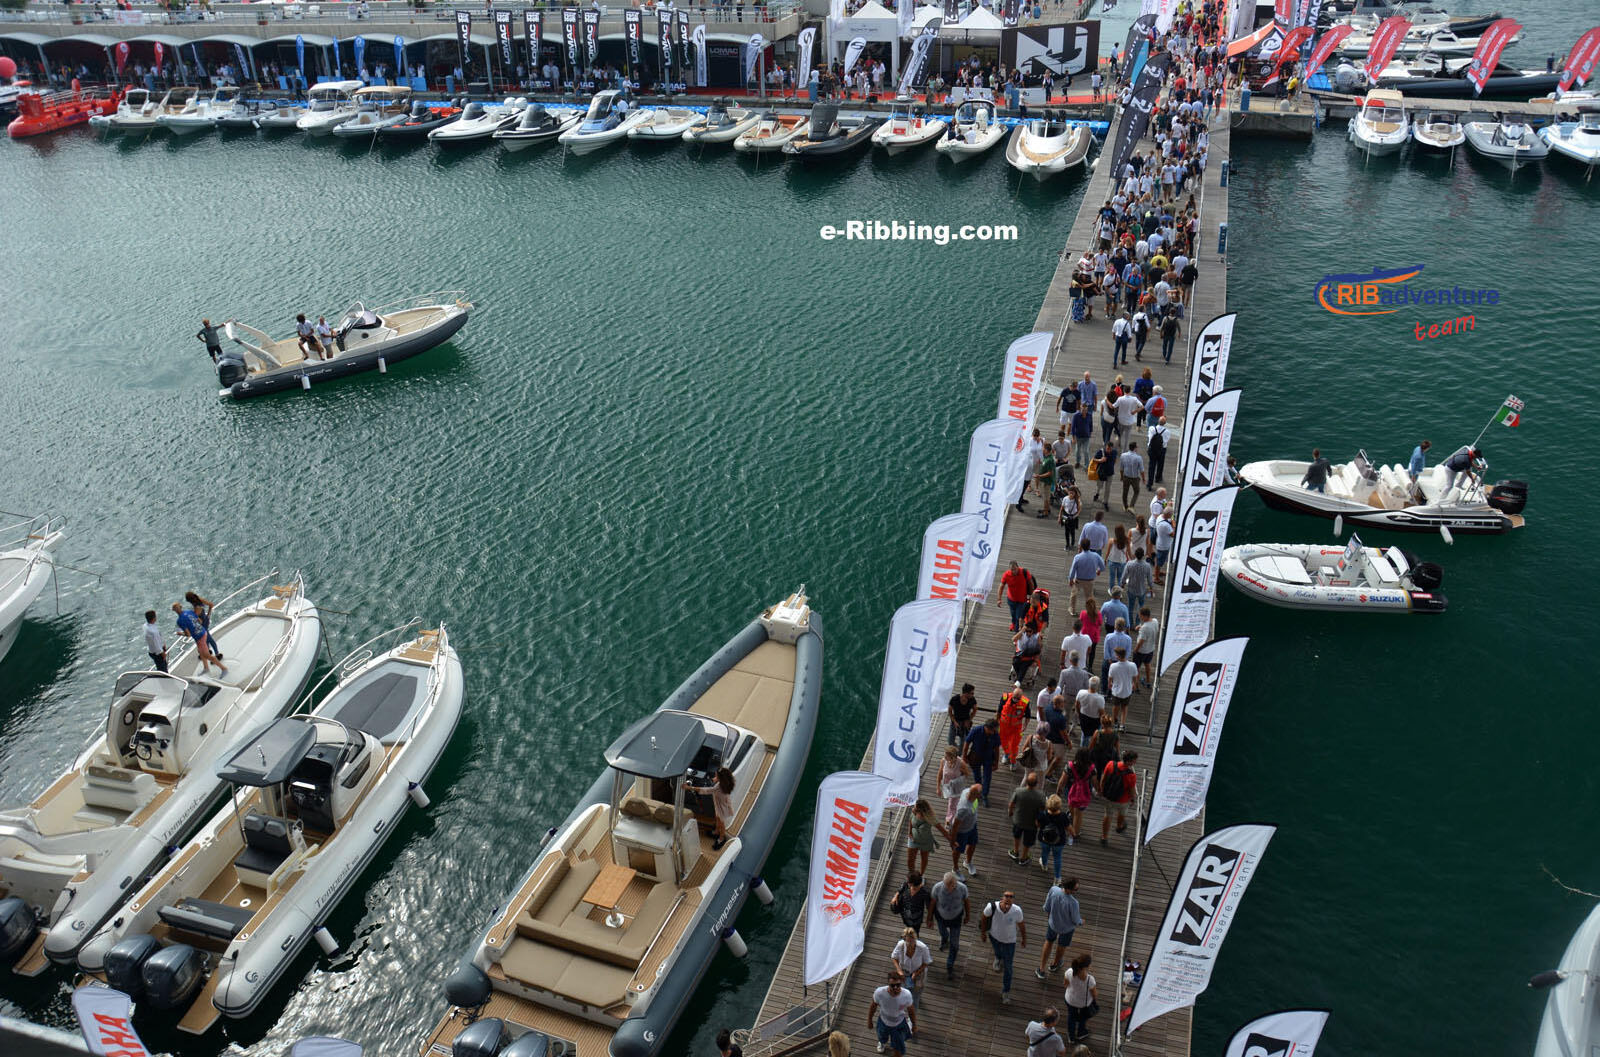 58th Genoa International Boat Show (20th – 25th of September 2018)